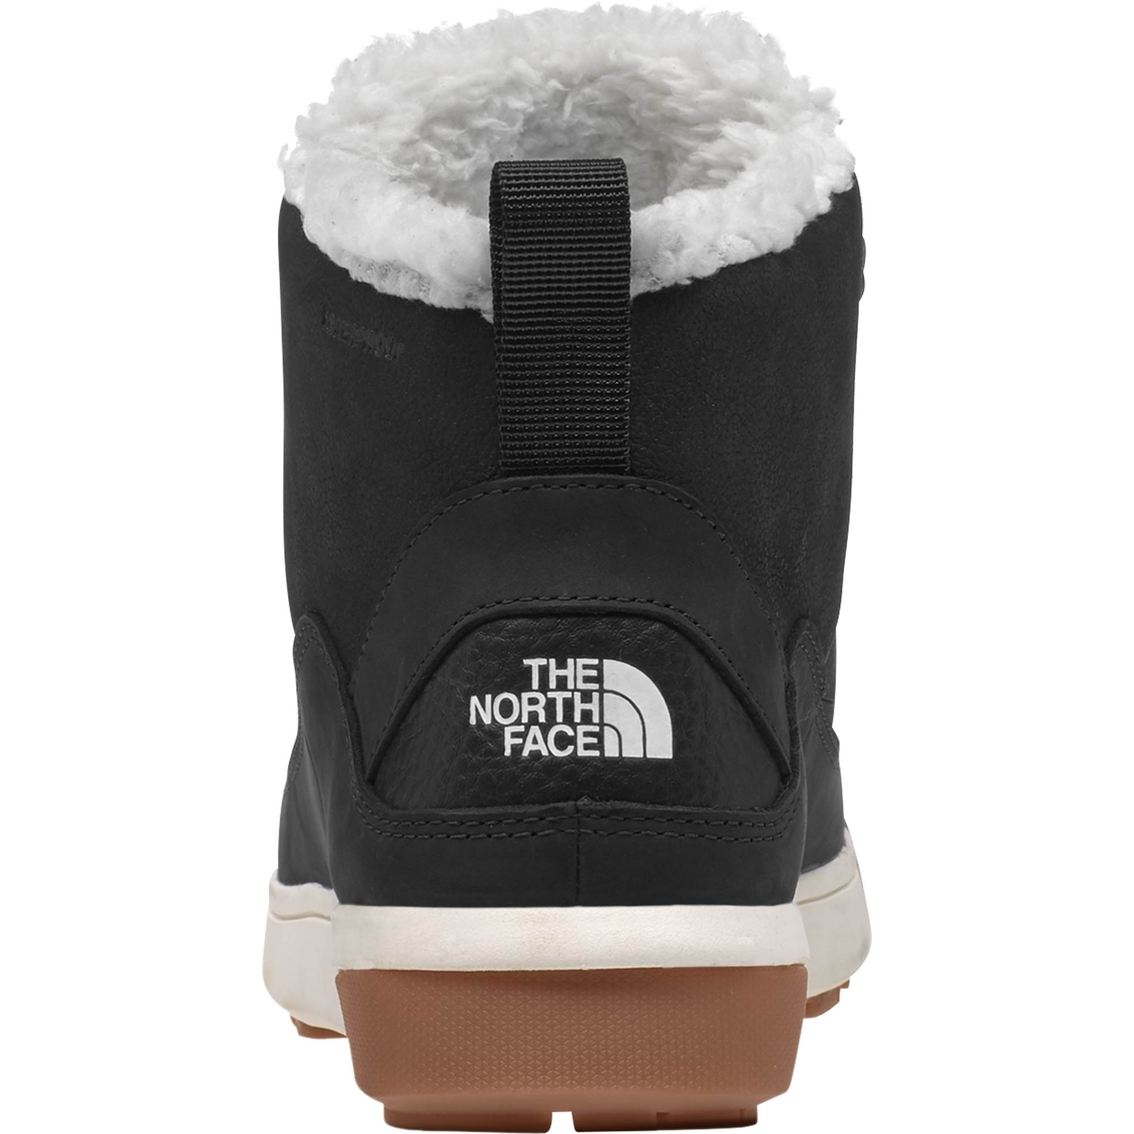 The North Face Sierra Mid Lace Waterproof Boots - Image 4 of 4